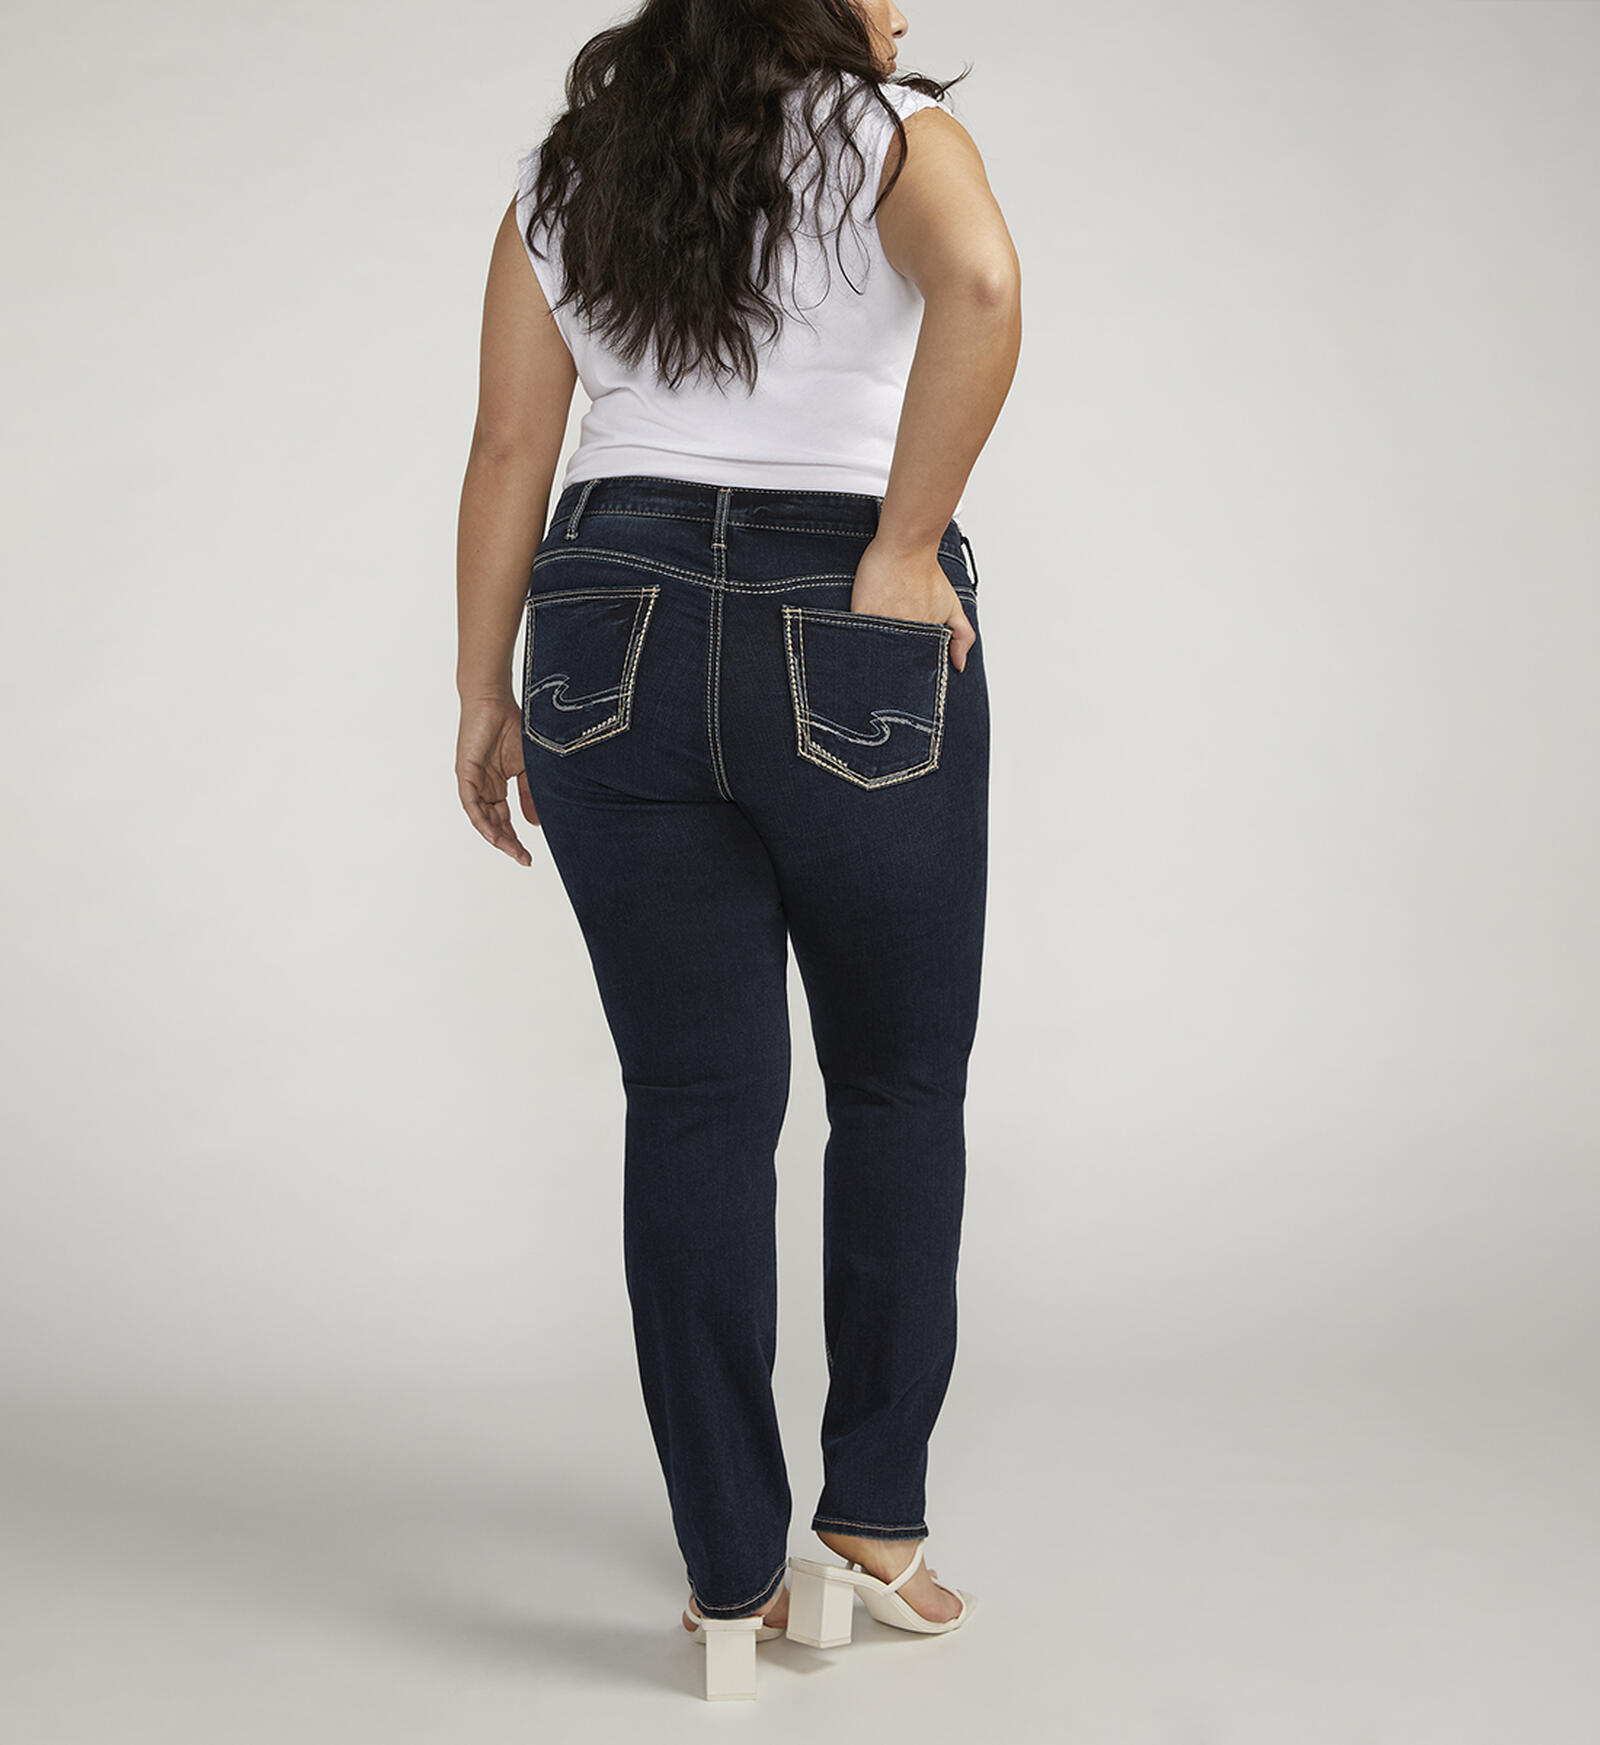 Buy Elyse Mid Rise Straight Leg Jeans Plus Size for USD 94.00